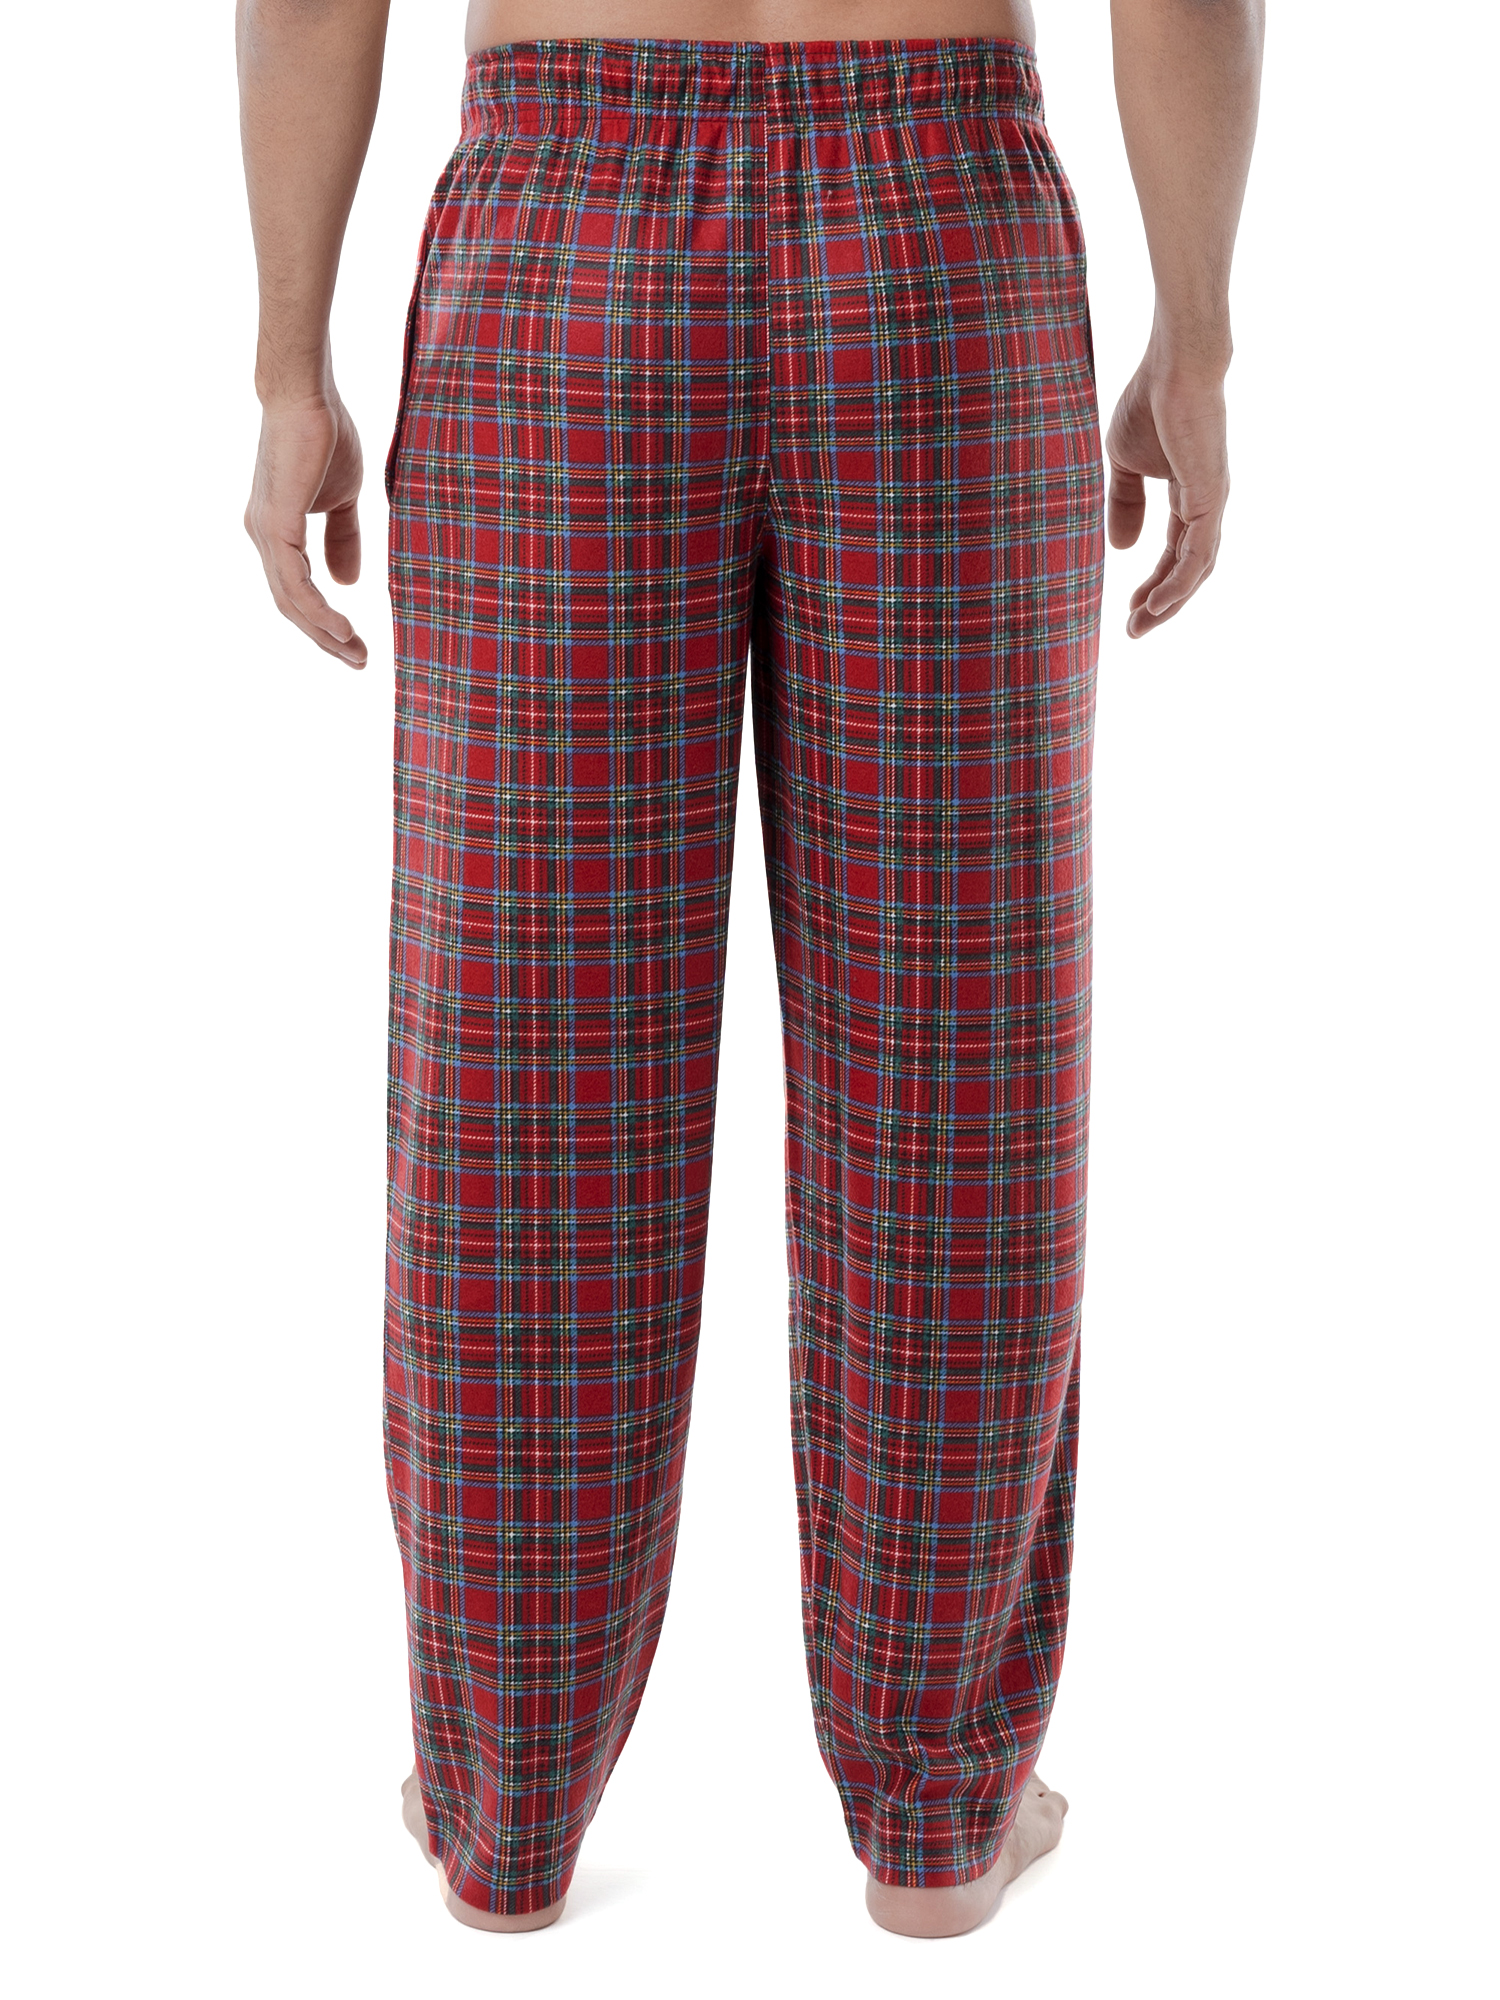 Fruit of the Loom Men's Holiday and Plaid Print Soft Microfleece Pajama Pant 2-Pack Bundle - image 6 of 15